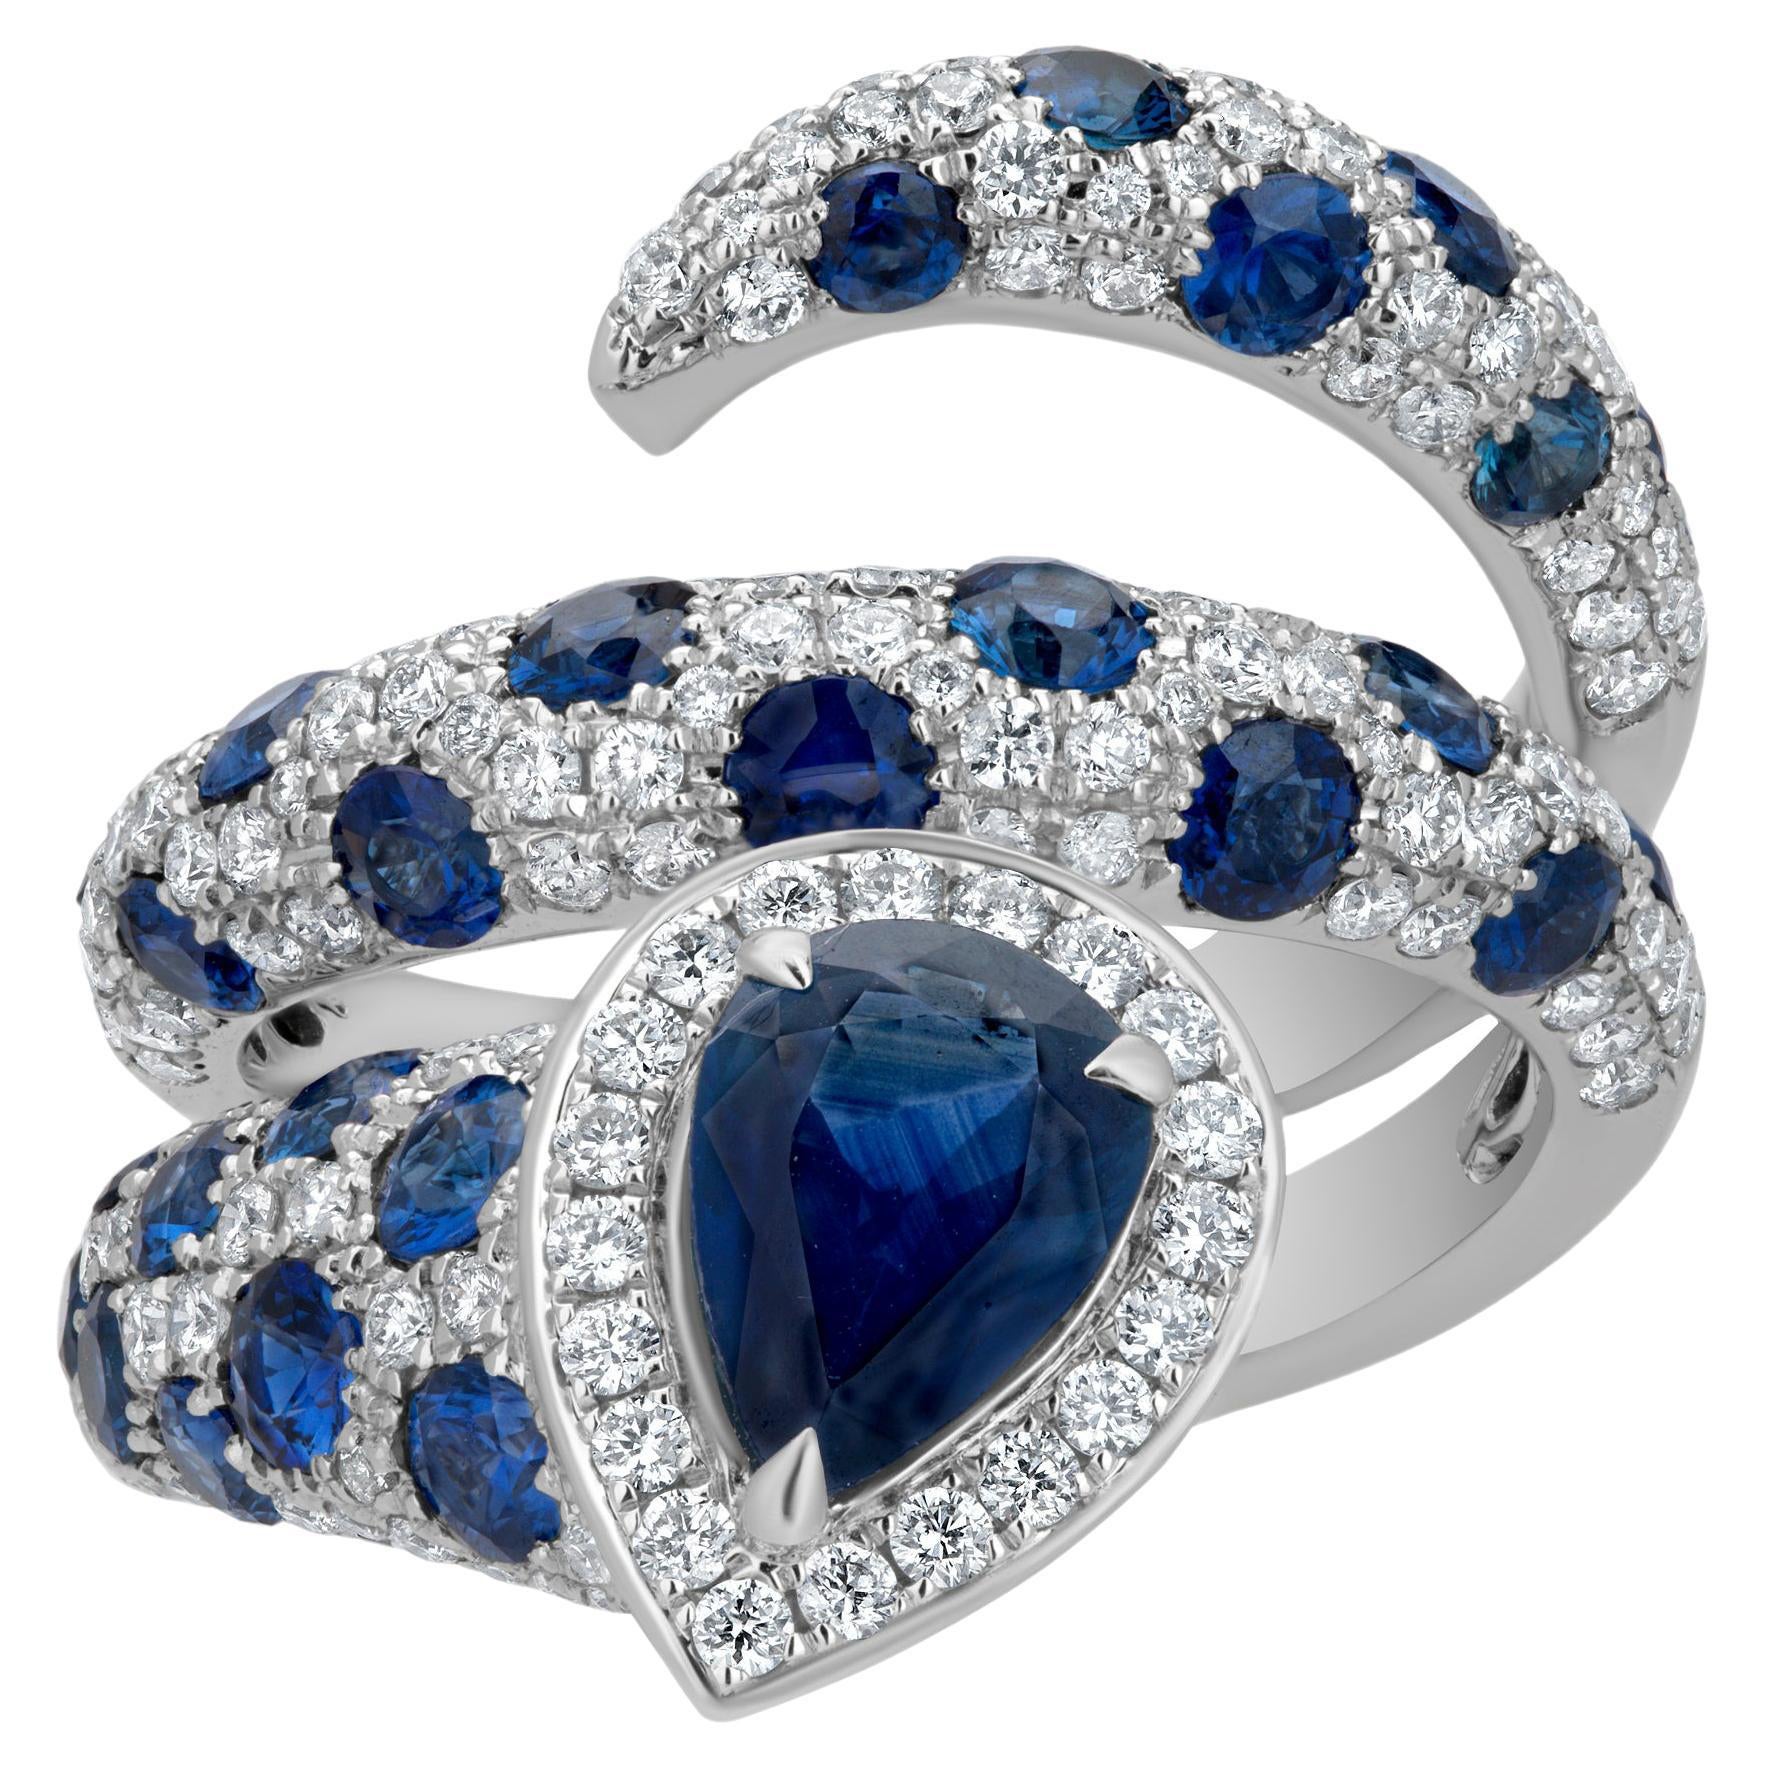 Nigaam 4.49 Cttw. Diamond and Blue Sapphire Swirl Ring in 18K White Gold